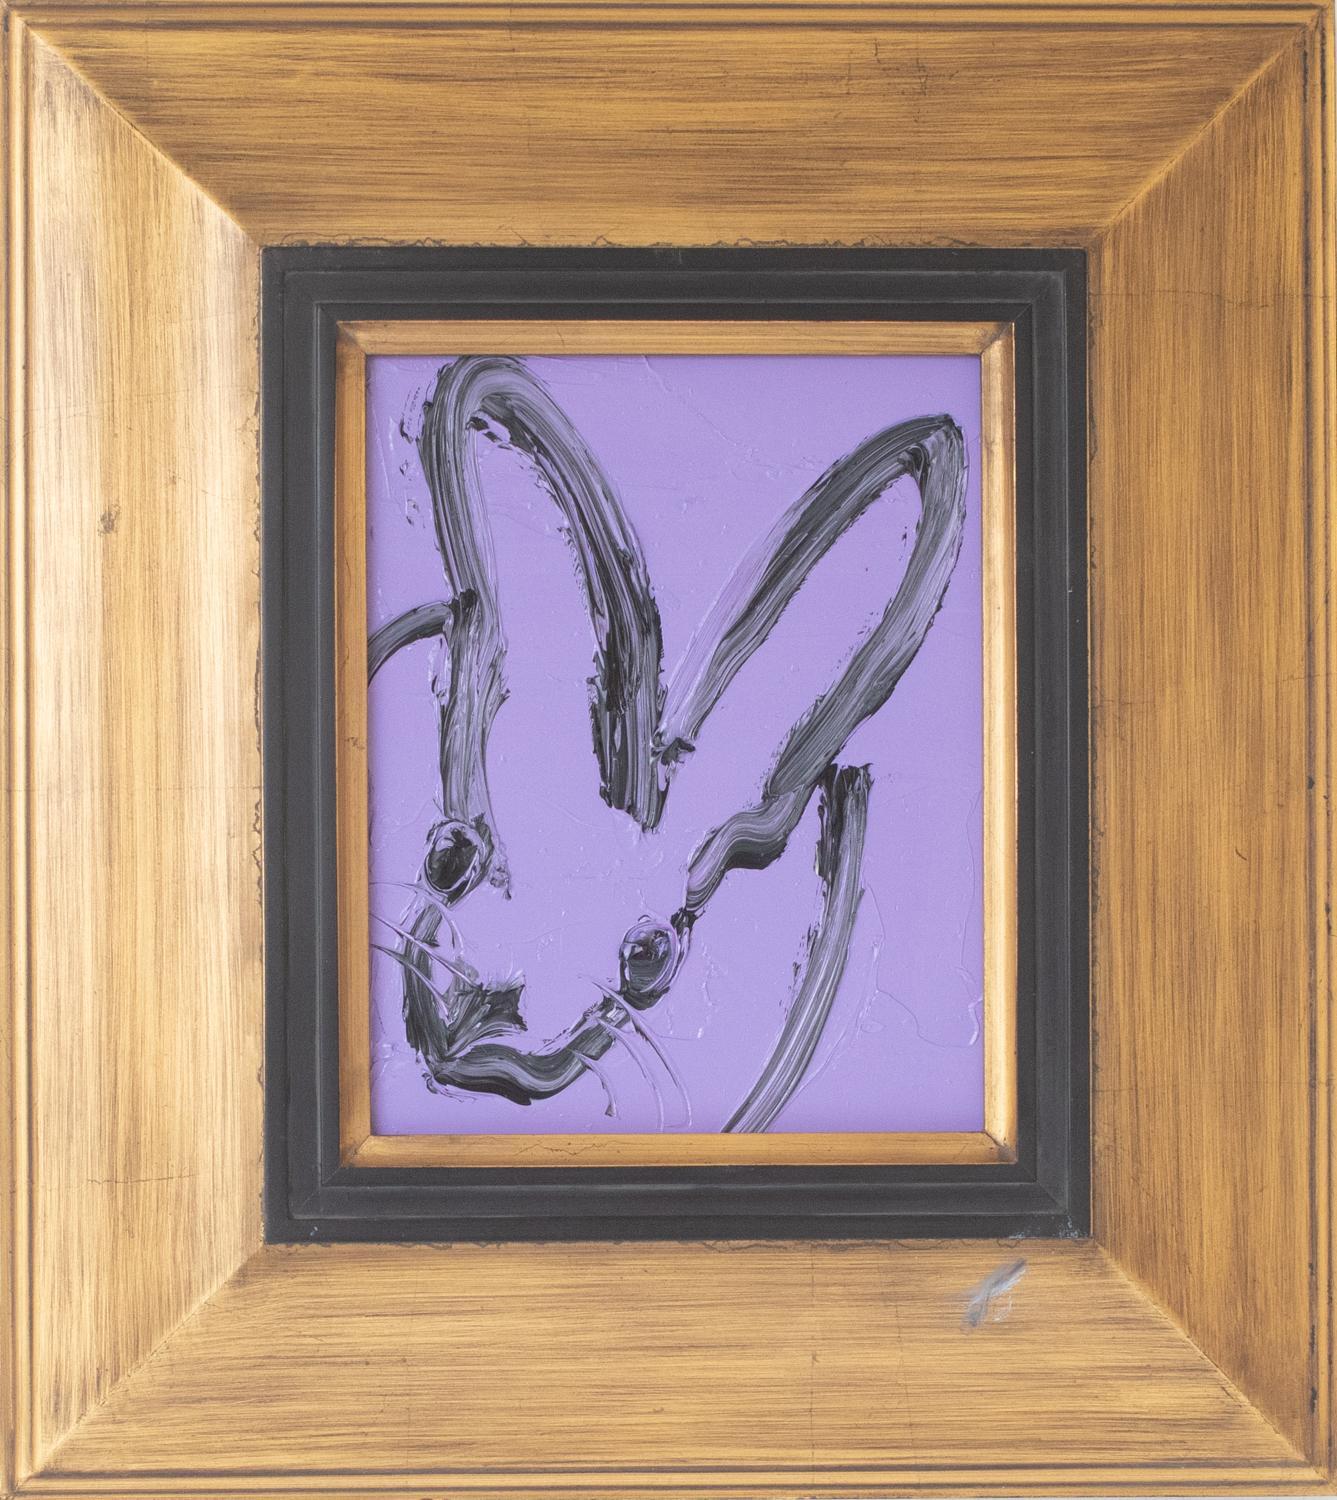 This black gestural bunny on lavender in vintage frame, is part of Hunt Slonem's famous bunny series. These layered, and thickly painted smaller pieces exemplify his vivid and exuberant style and color palate. 
New York painter, Hunt Slonem is best